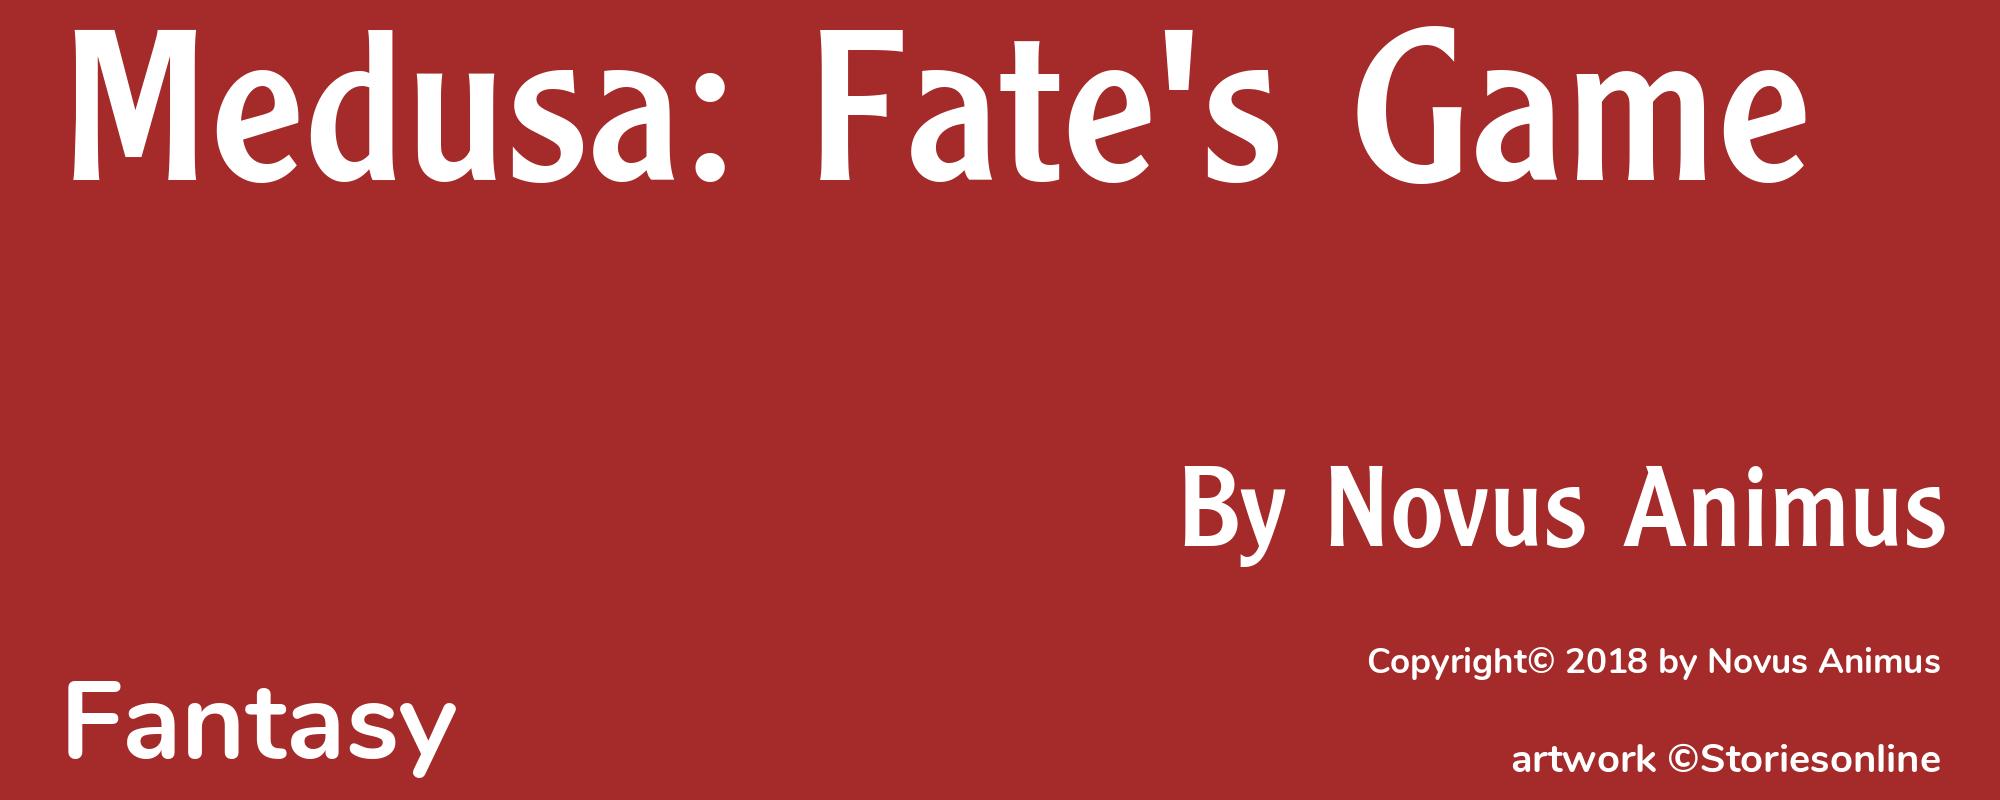 Medusa: Fate's Game - Cover